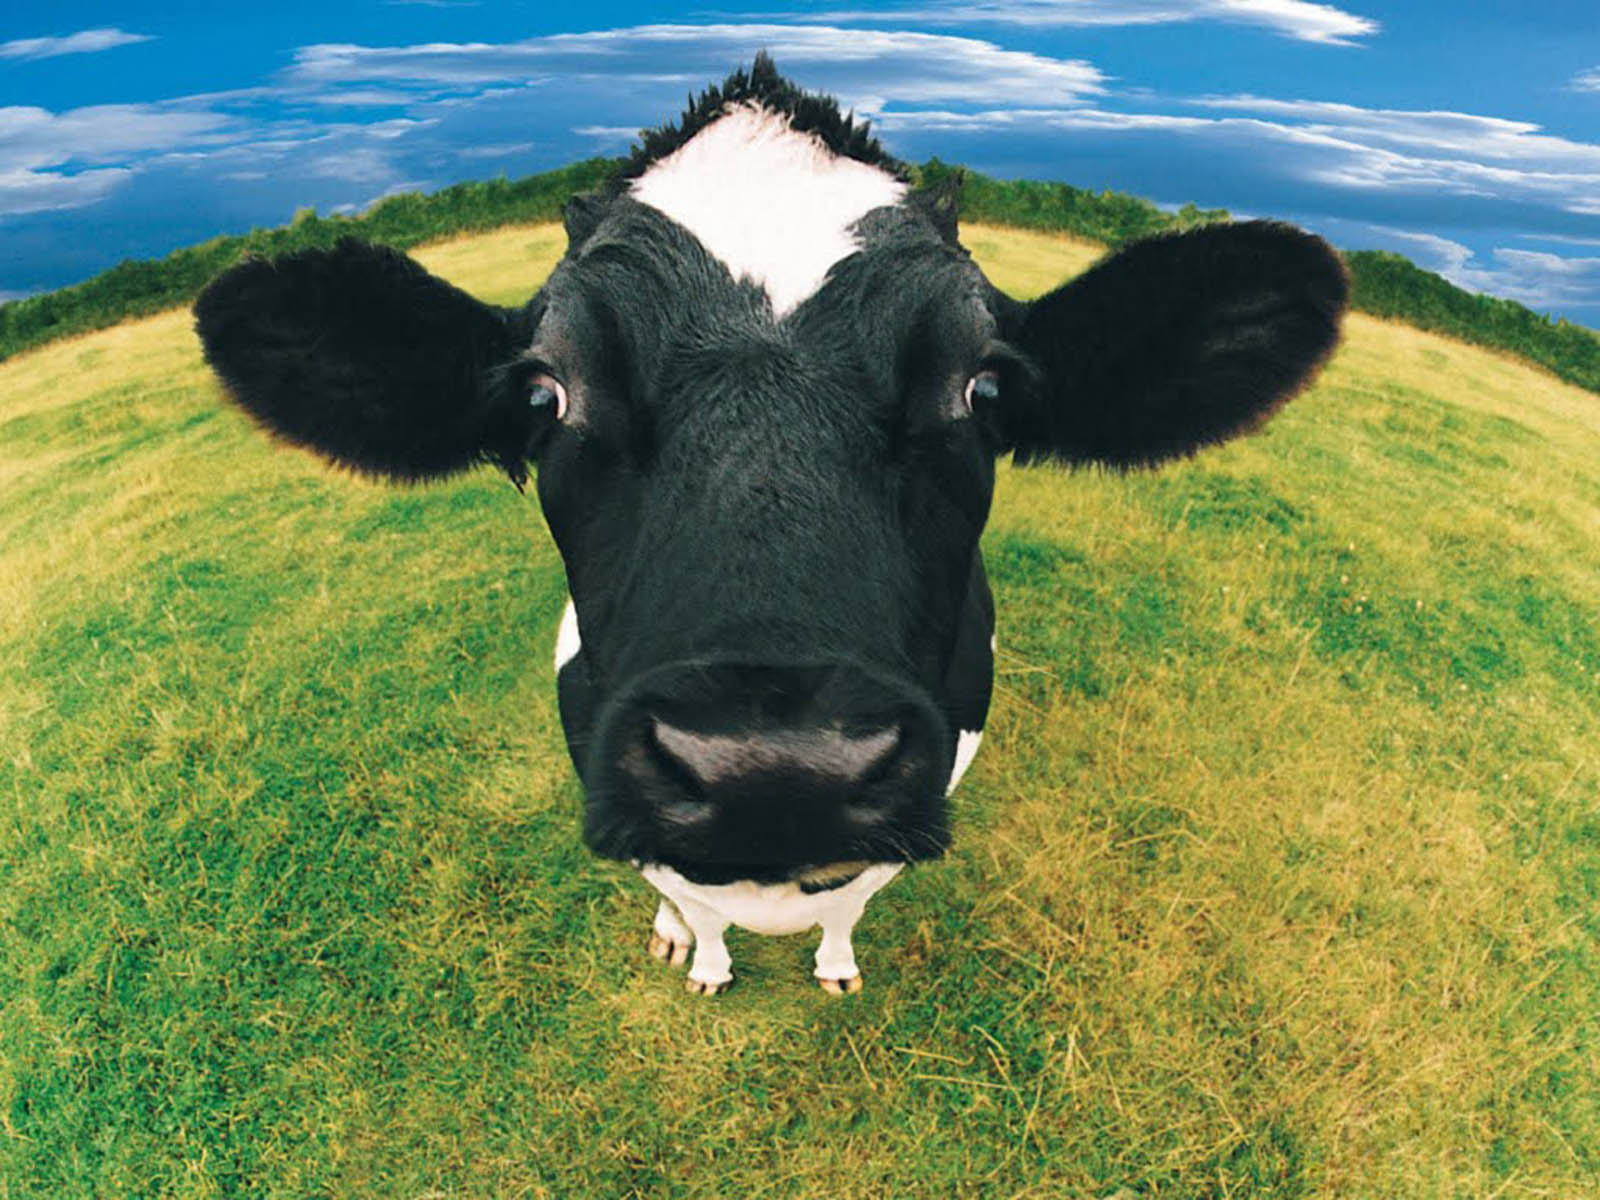  farm animals wallpapers images photos pictures and backgrounds for 1600x1200